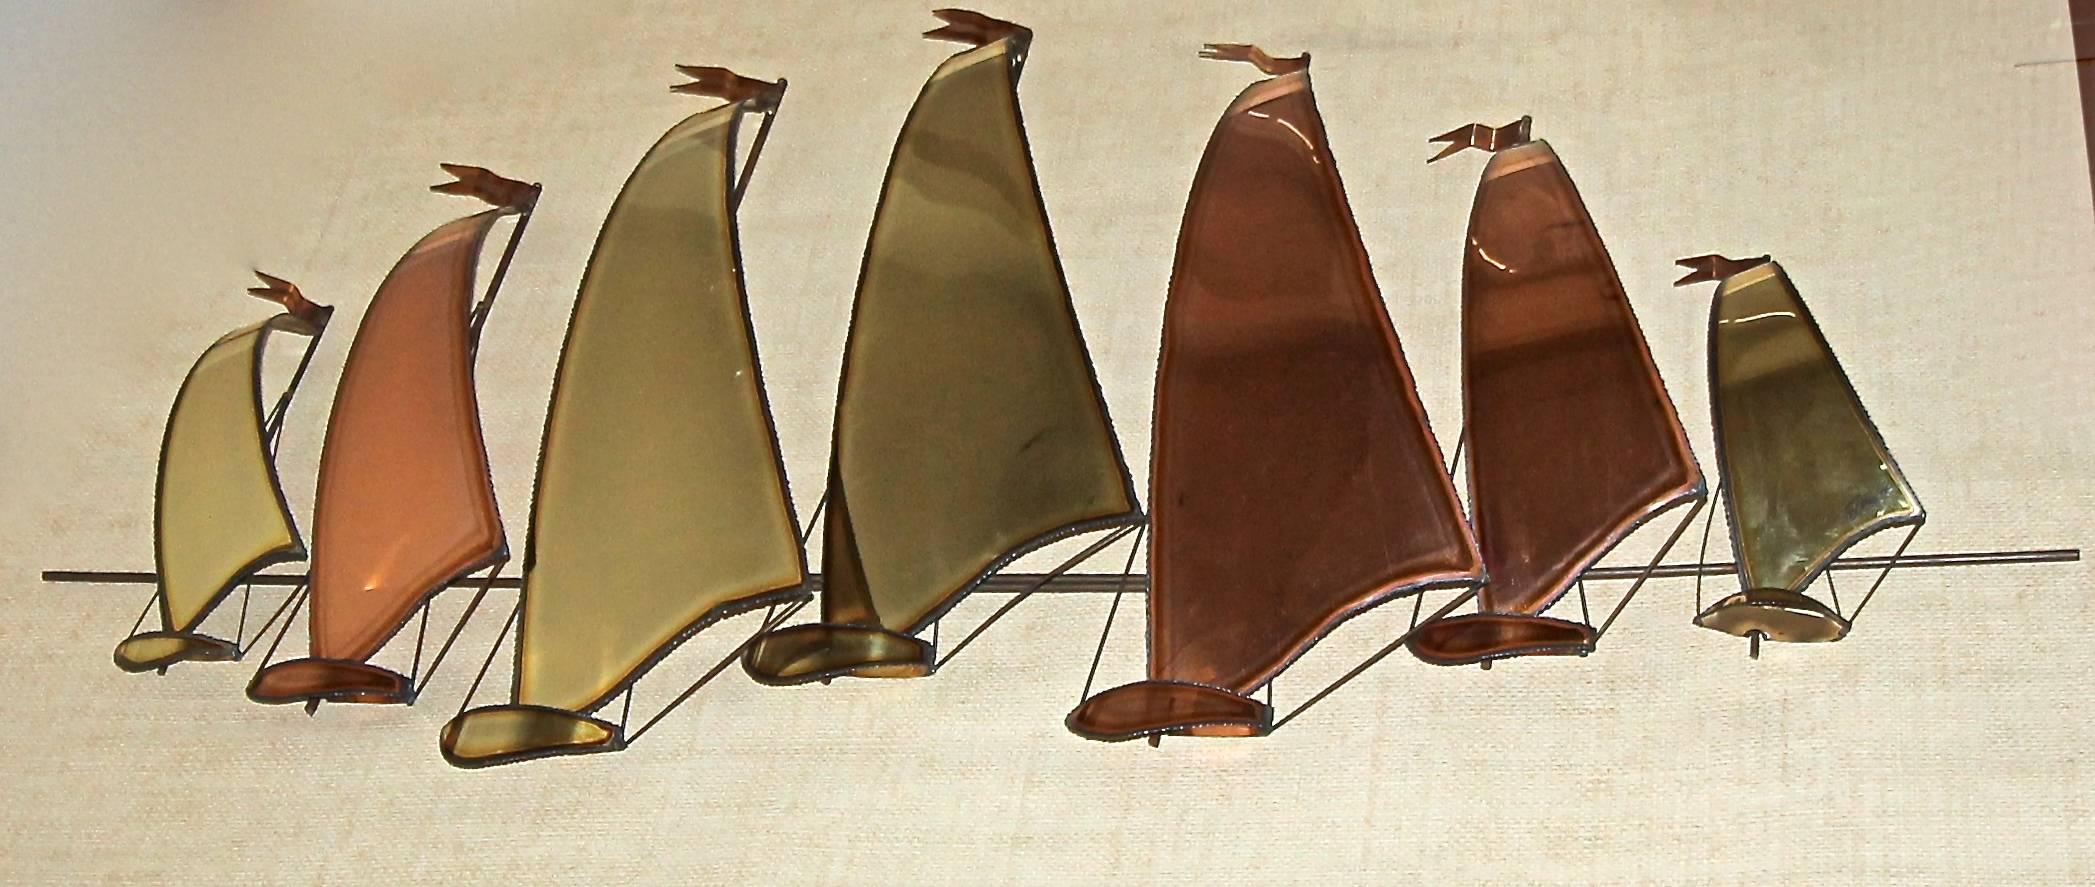 Mid-20th Century Large C. Jere Style Sail Boat Brass and Copper Wall Sculpture